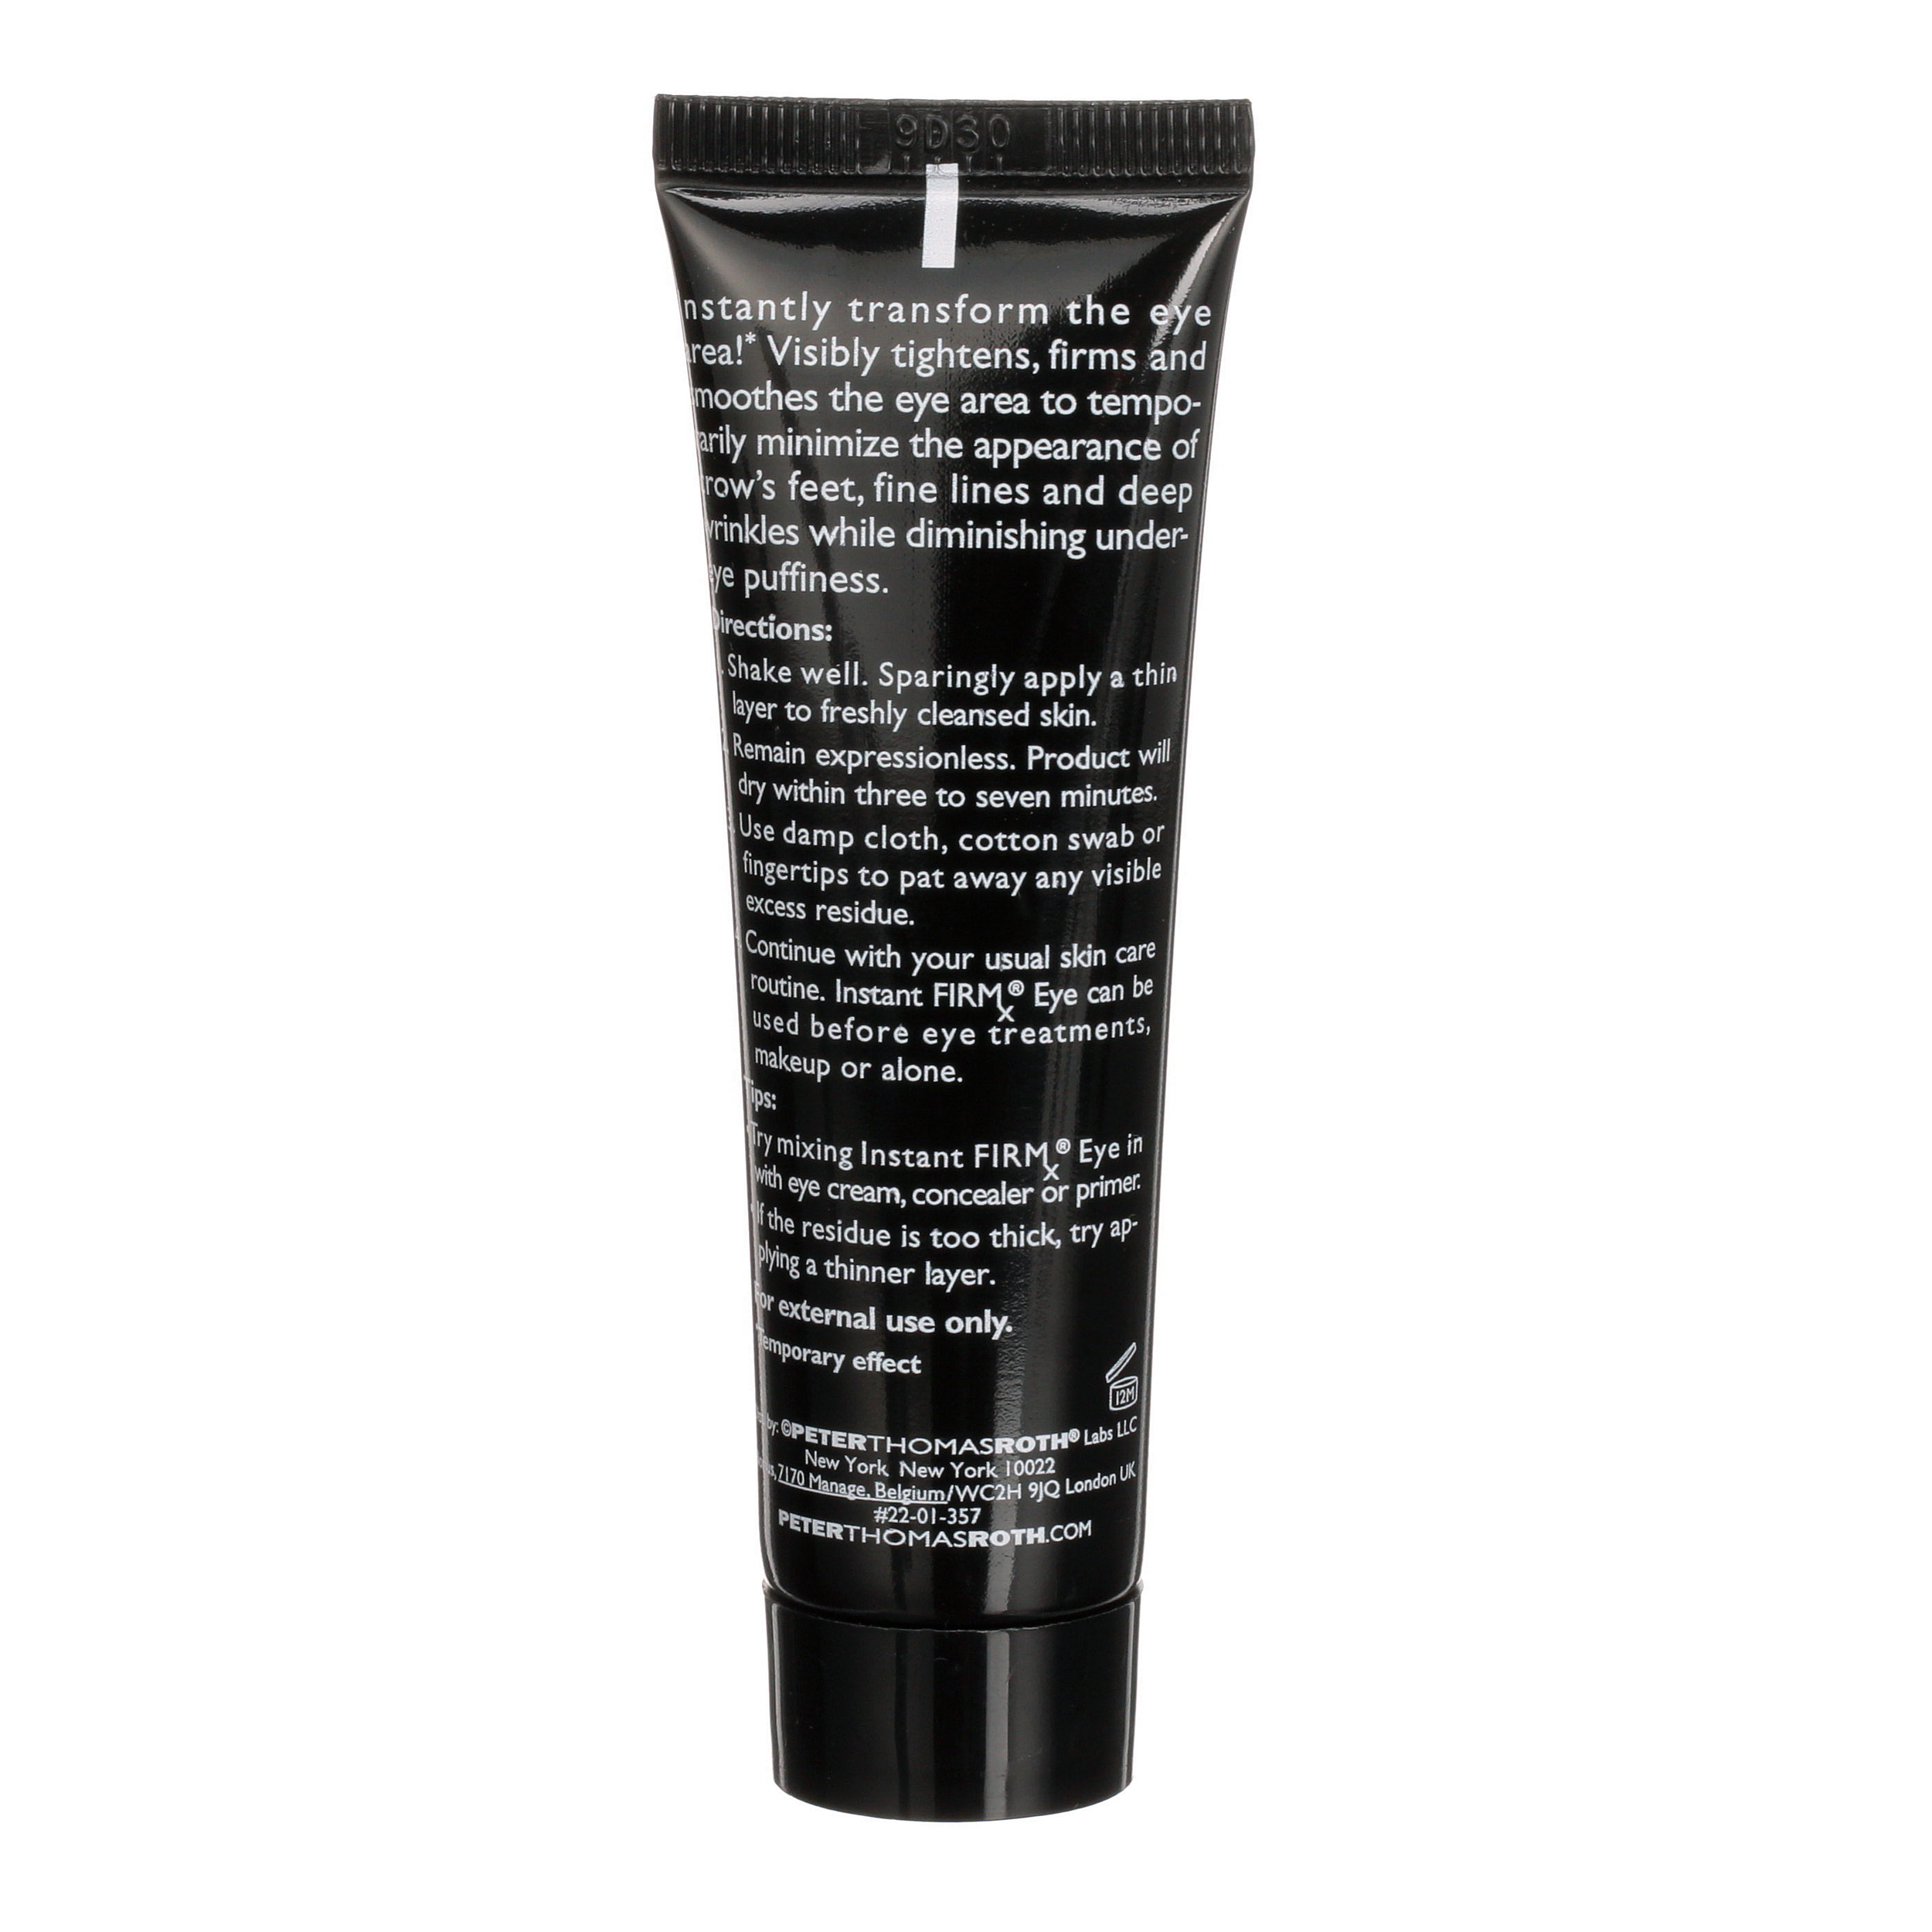 Peter Thomas Roth Instant FIRMx Eye 1 oz - image 2 of 6